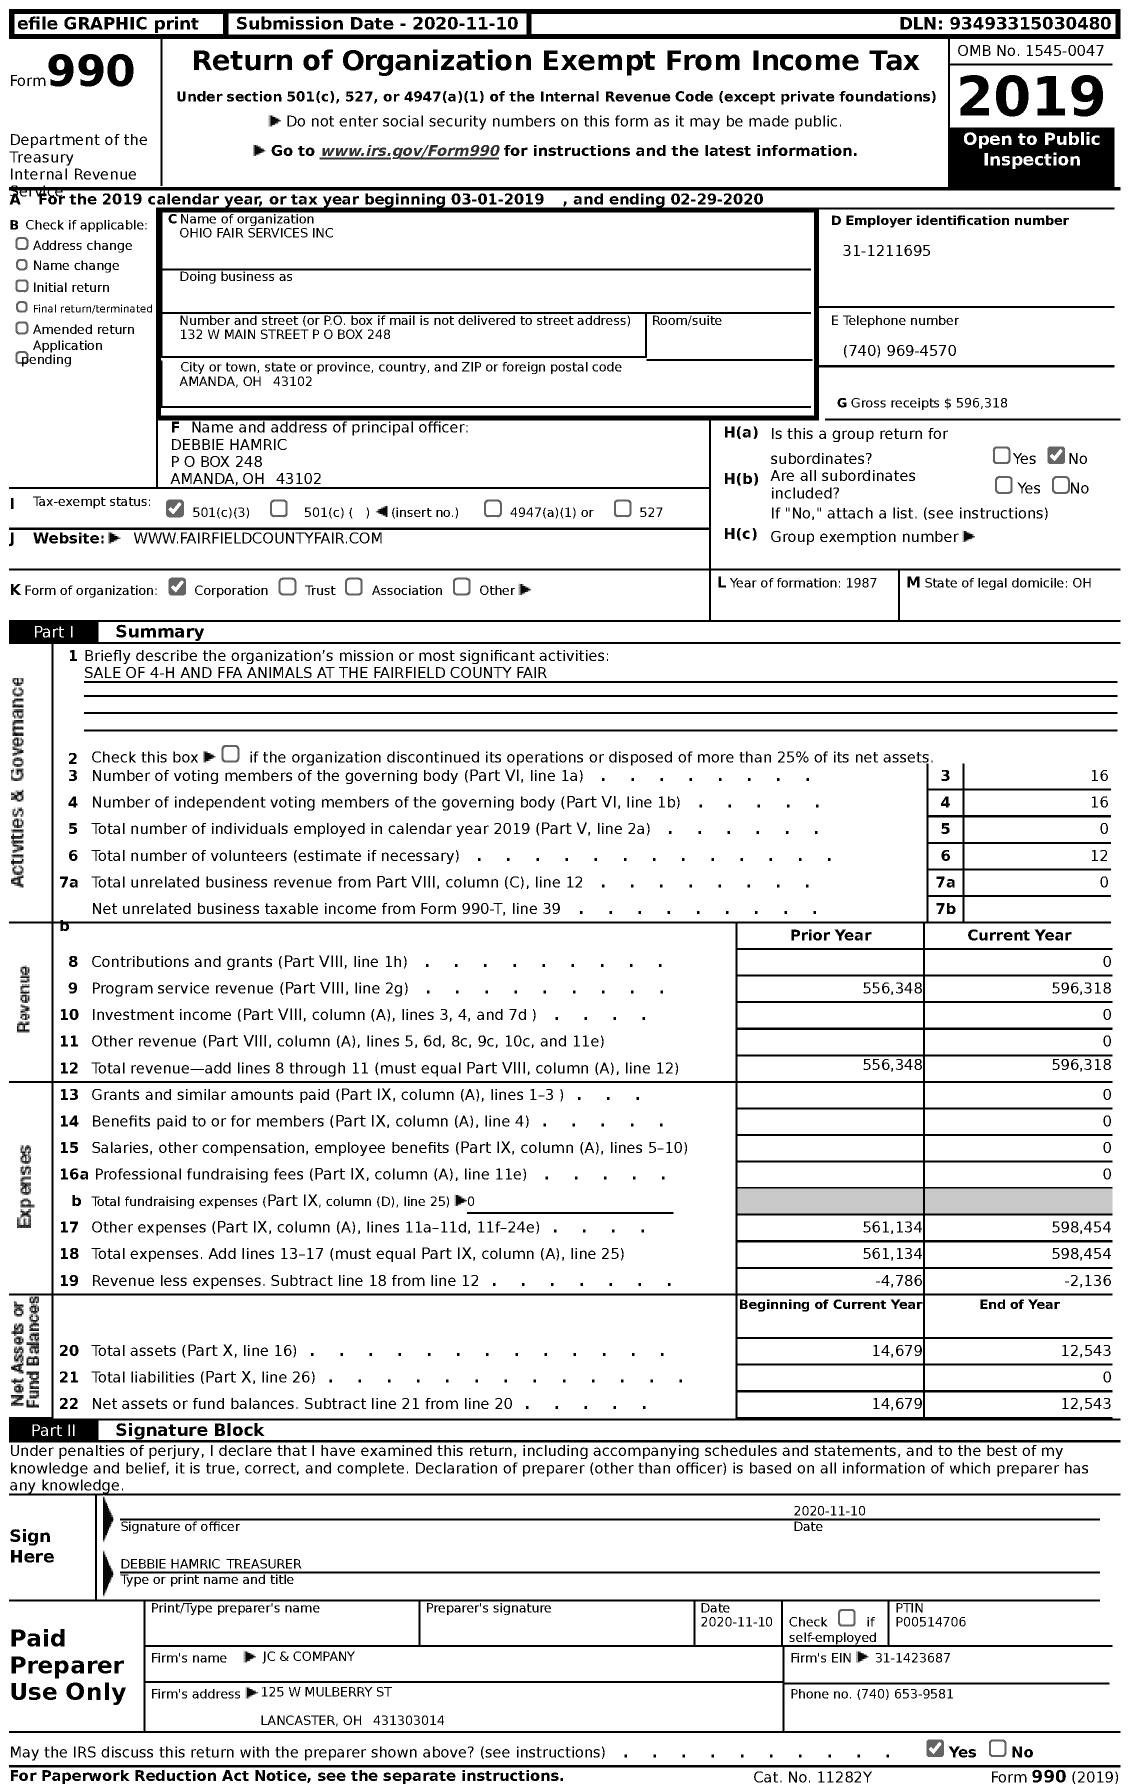 Image of first page of 2019 Form 990 for Ohio Fair Services